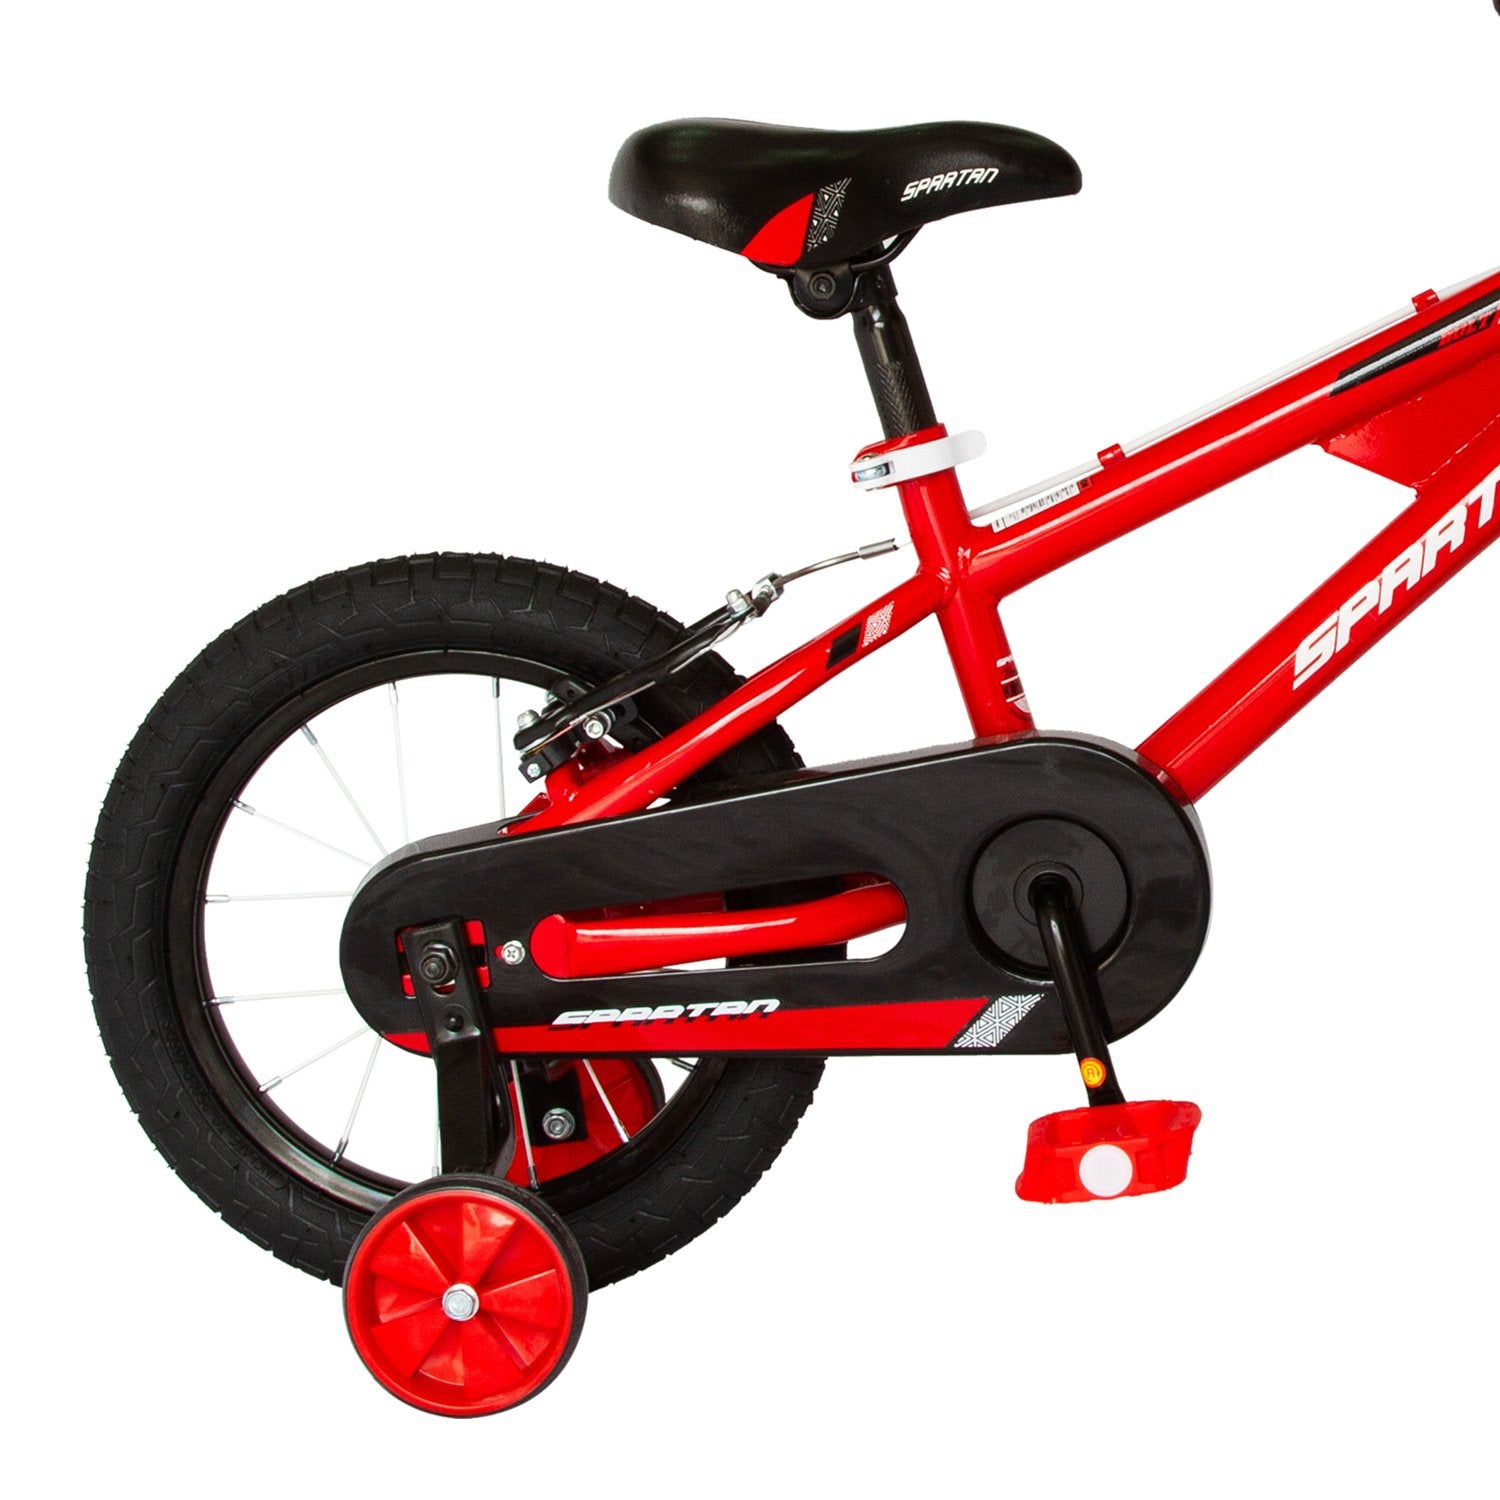 Spartan 14" Bolt Bicycle - Red